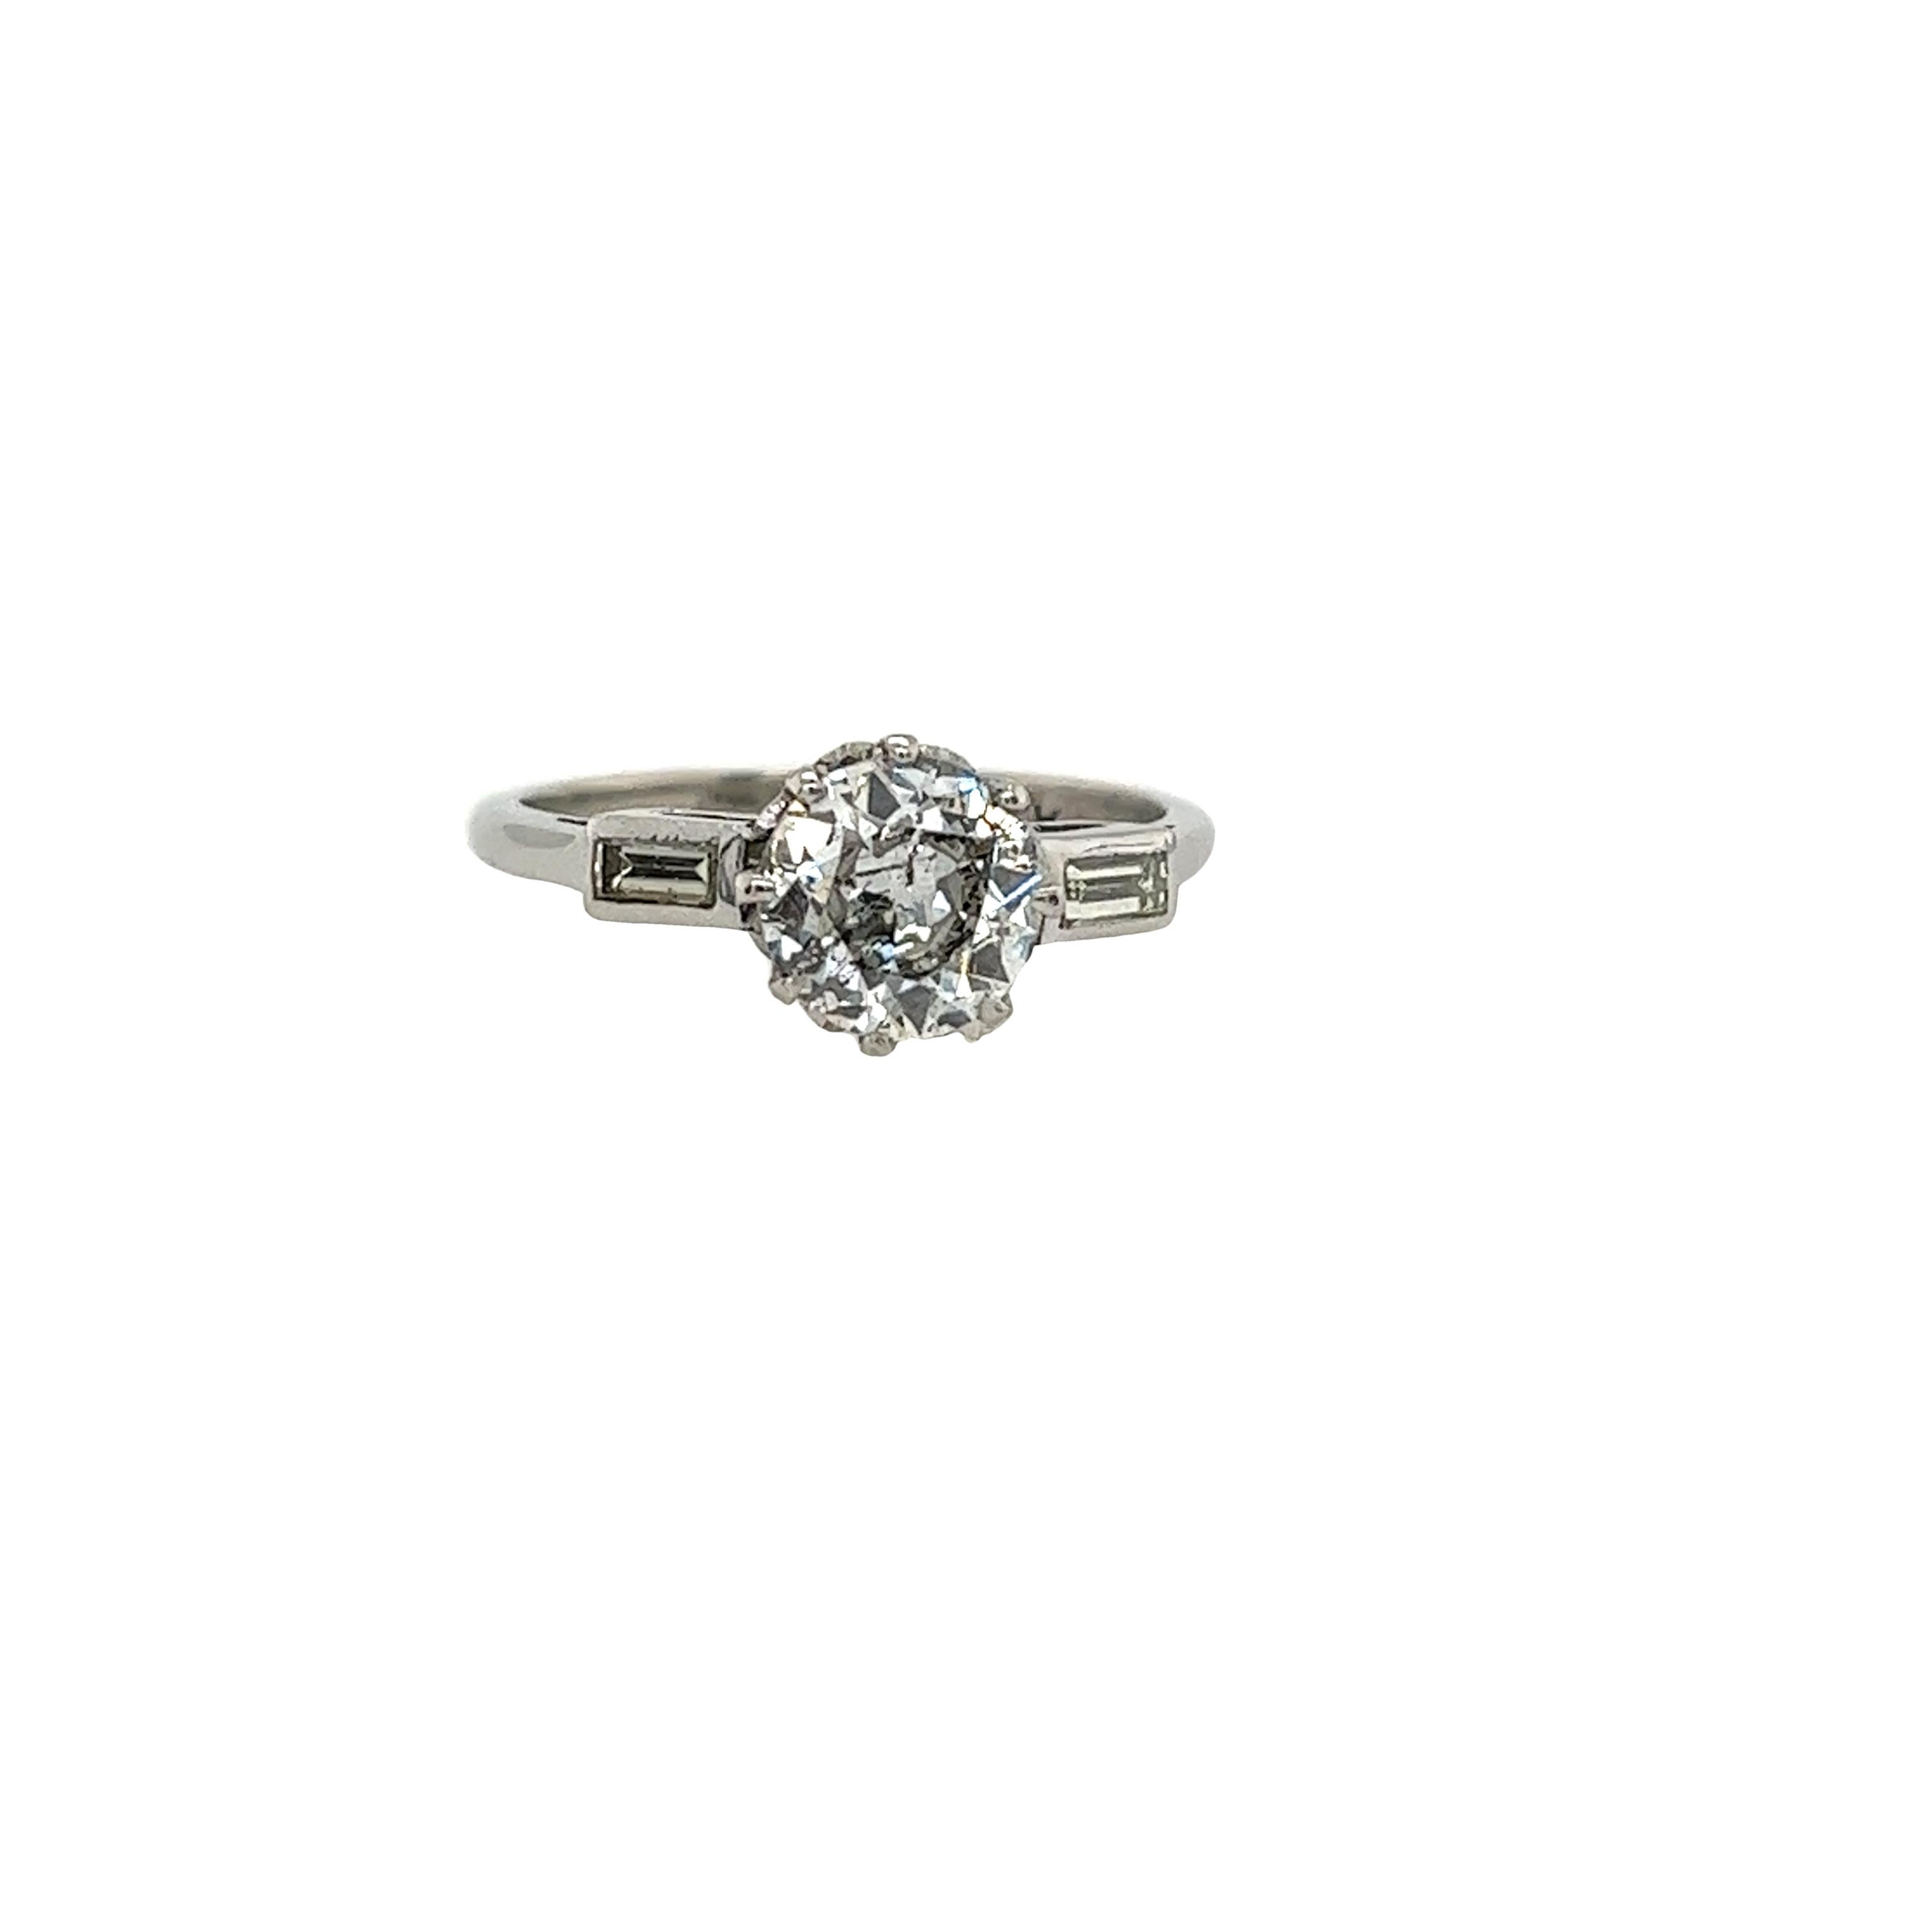 This Platinum solitaire diamond ring 1.12ct 
F colour, I2 clarity
is set with 2 baguette diamonds 
on the shoulders totaling 0.12ct.
This ring is elegant and beautiful 
and will last as long as your love does.
Total Diamond Weight: 1.12ct +